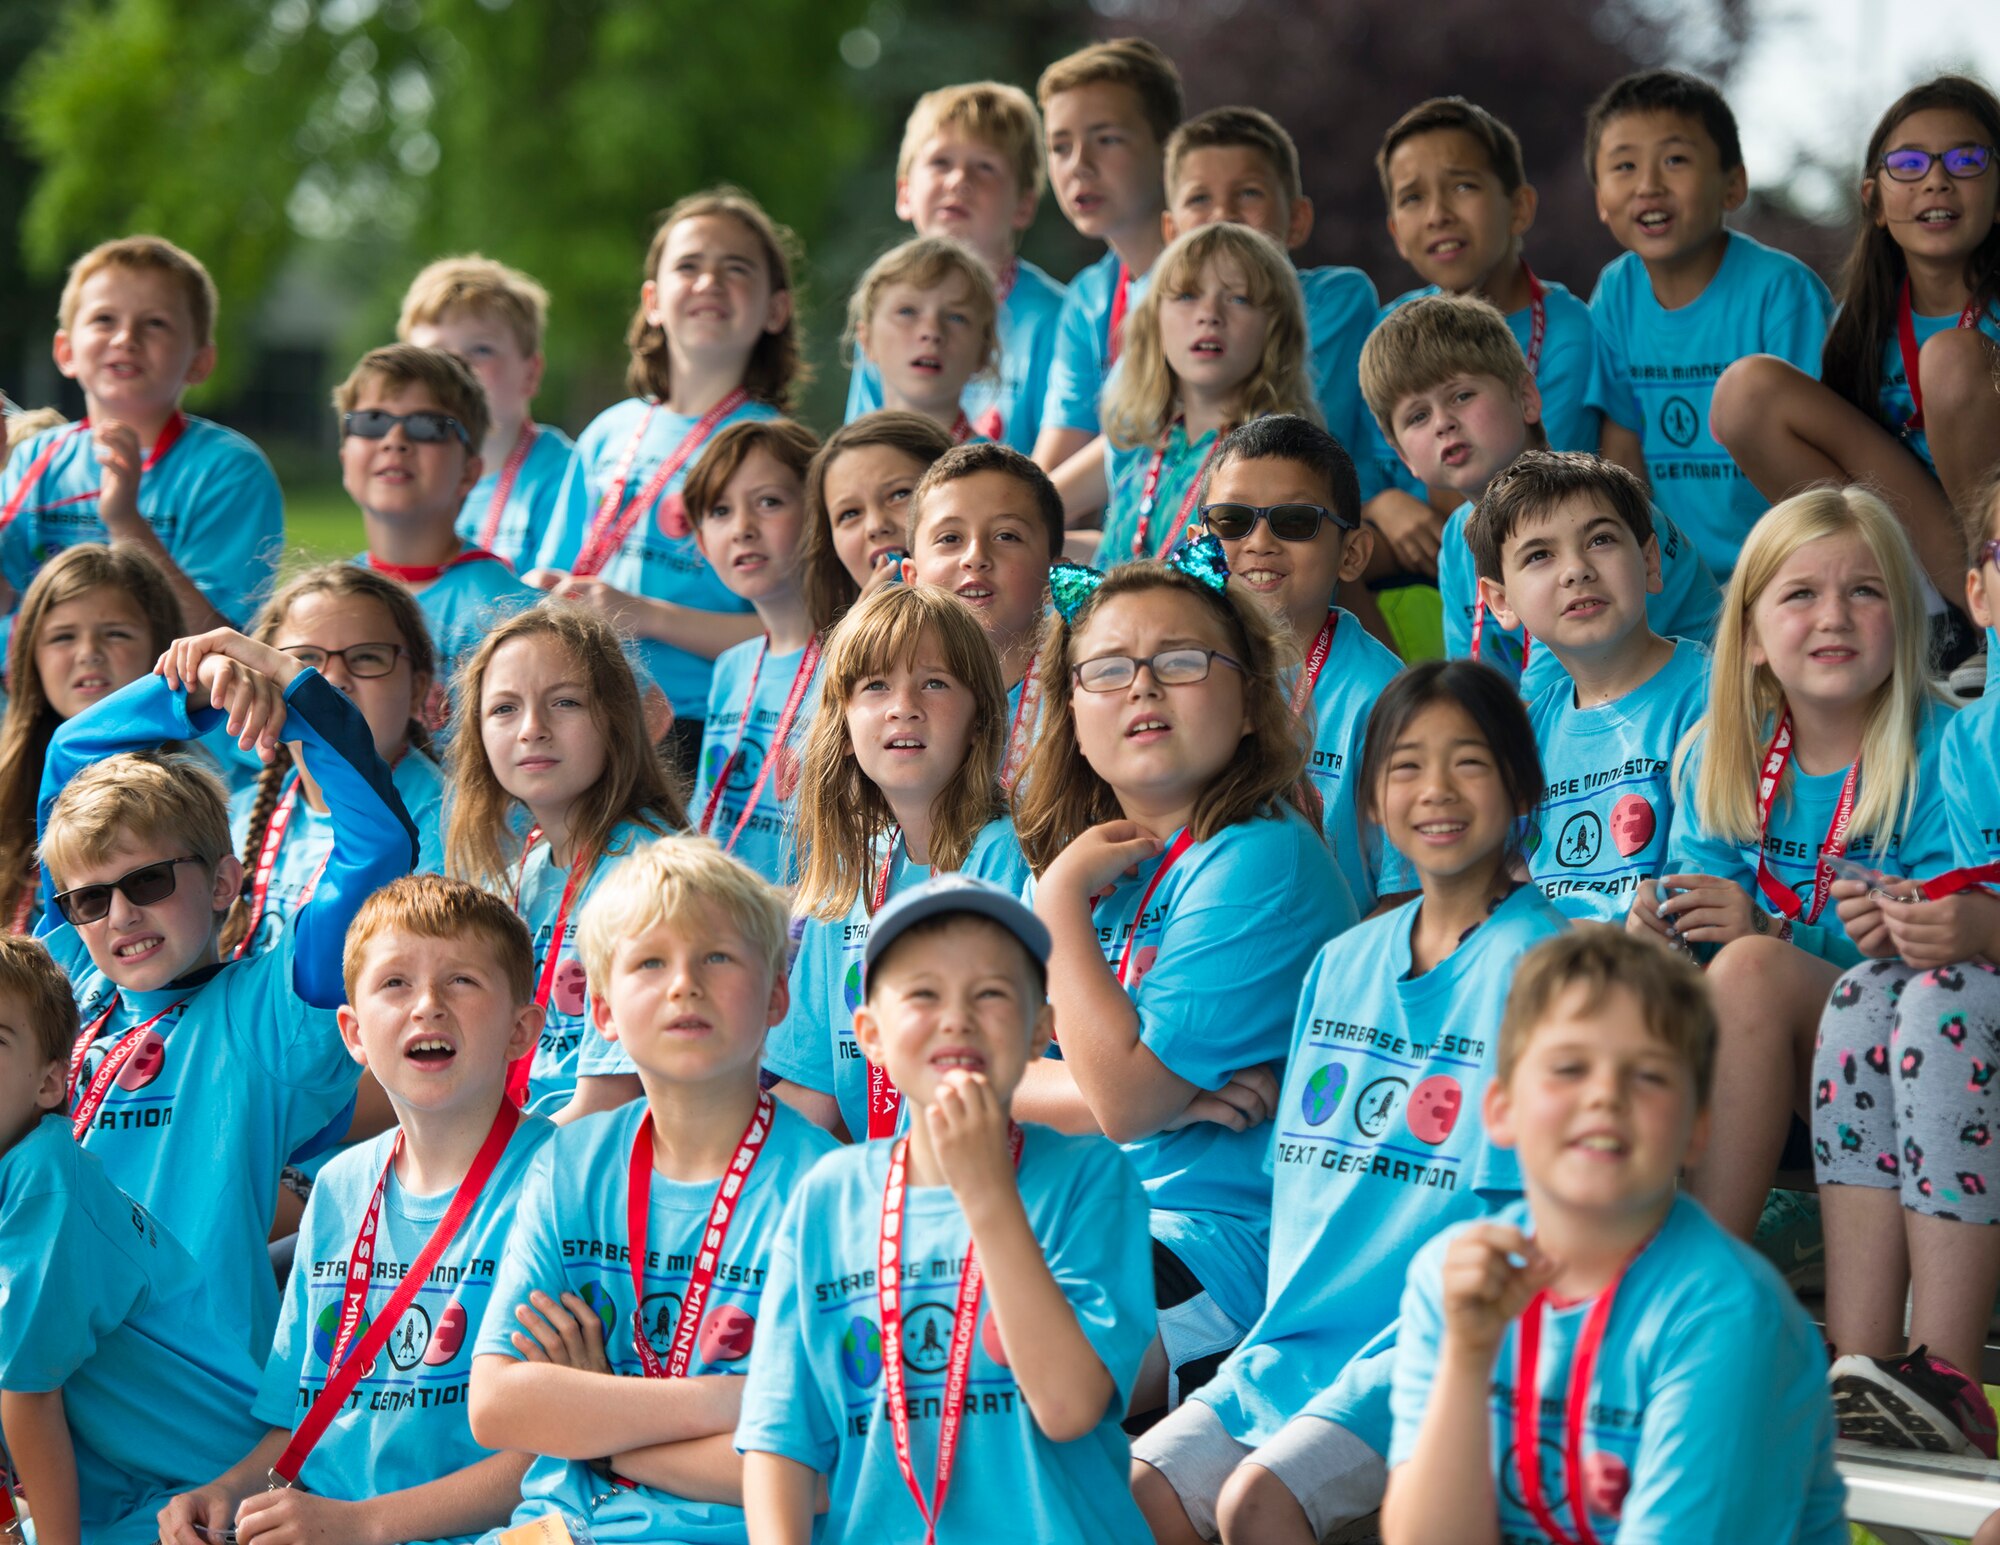 Students from STARBASE Minnesota watch rockets blast off from the launch pad in St. Paul, Minn., July 18, 2019.